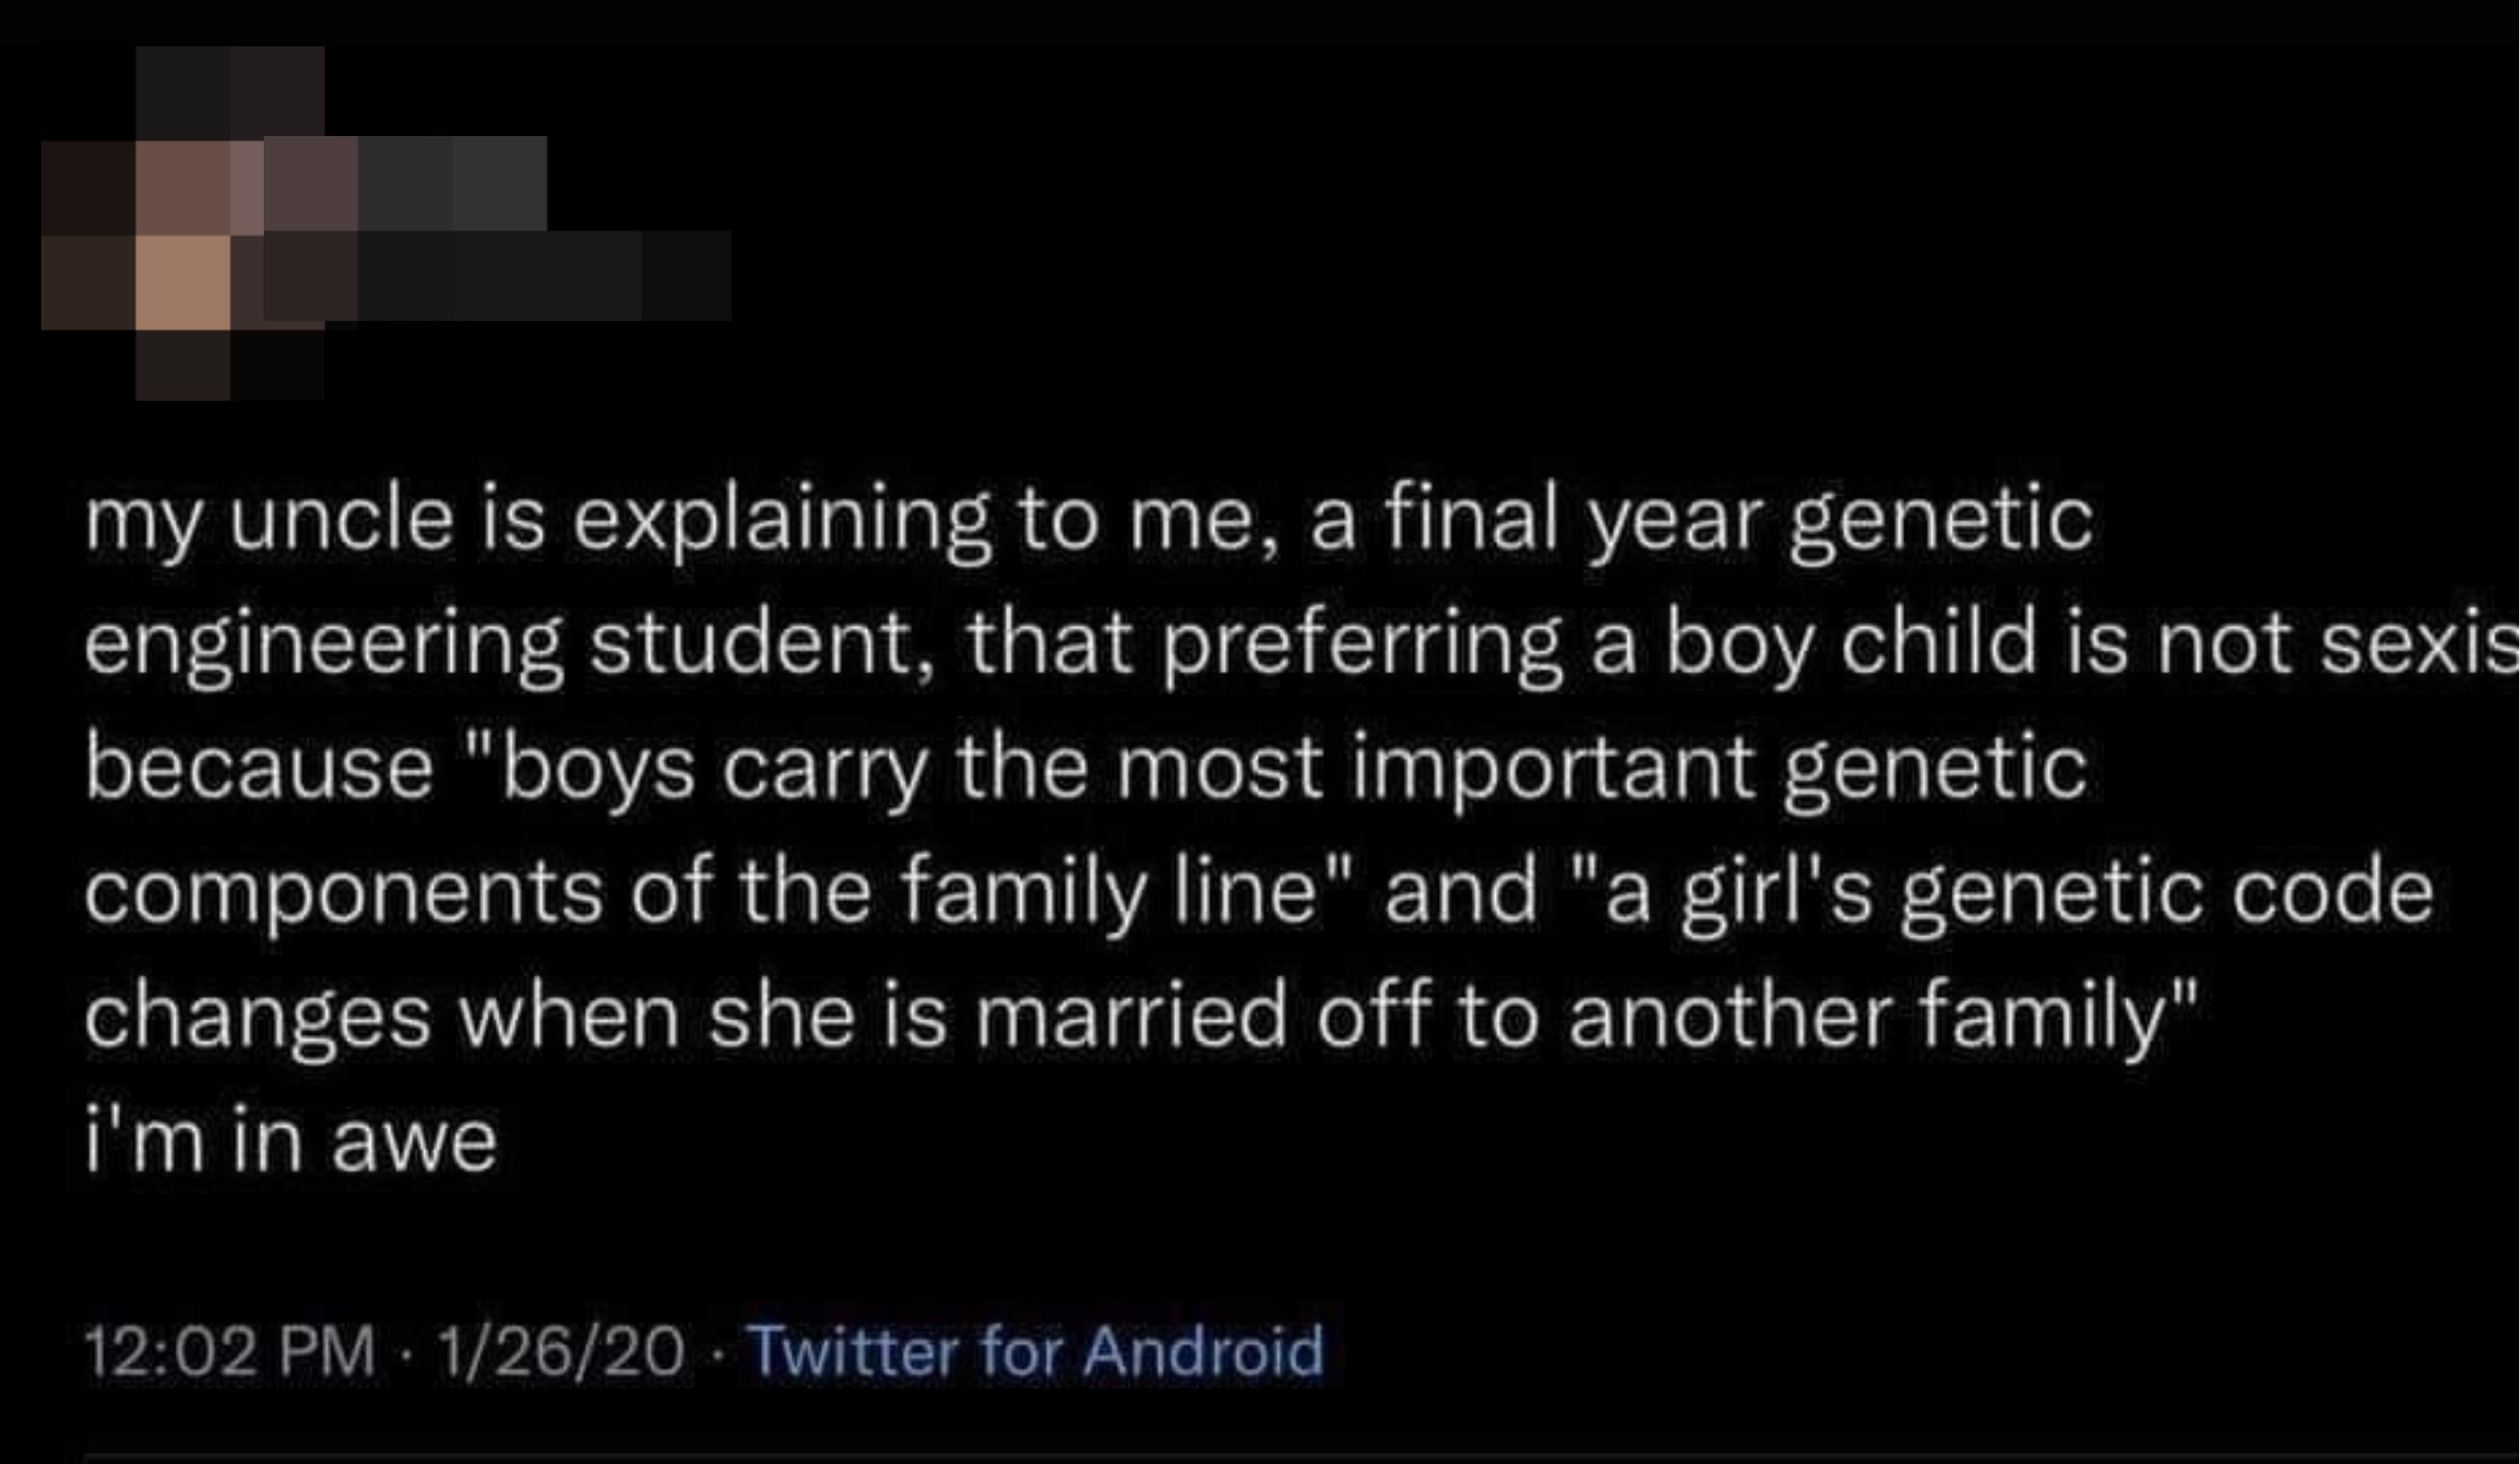 Uncle tells a final-year genetic engineering student that preferring a &quot;boy child&quot; is not sexist because &quot;boys carry the most important genetic components of the family line&quot; and &quot;a girl&#x27;s genetic code changes when she is married off to another family&quot;